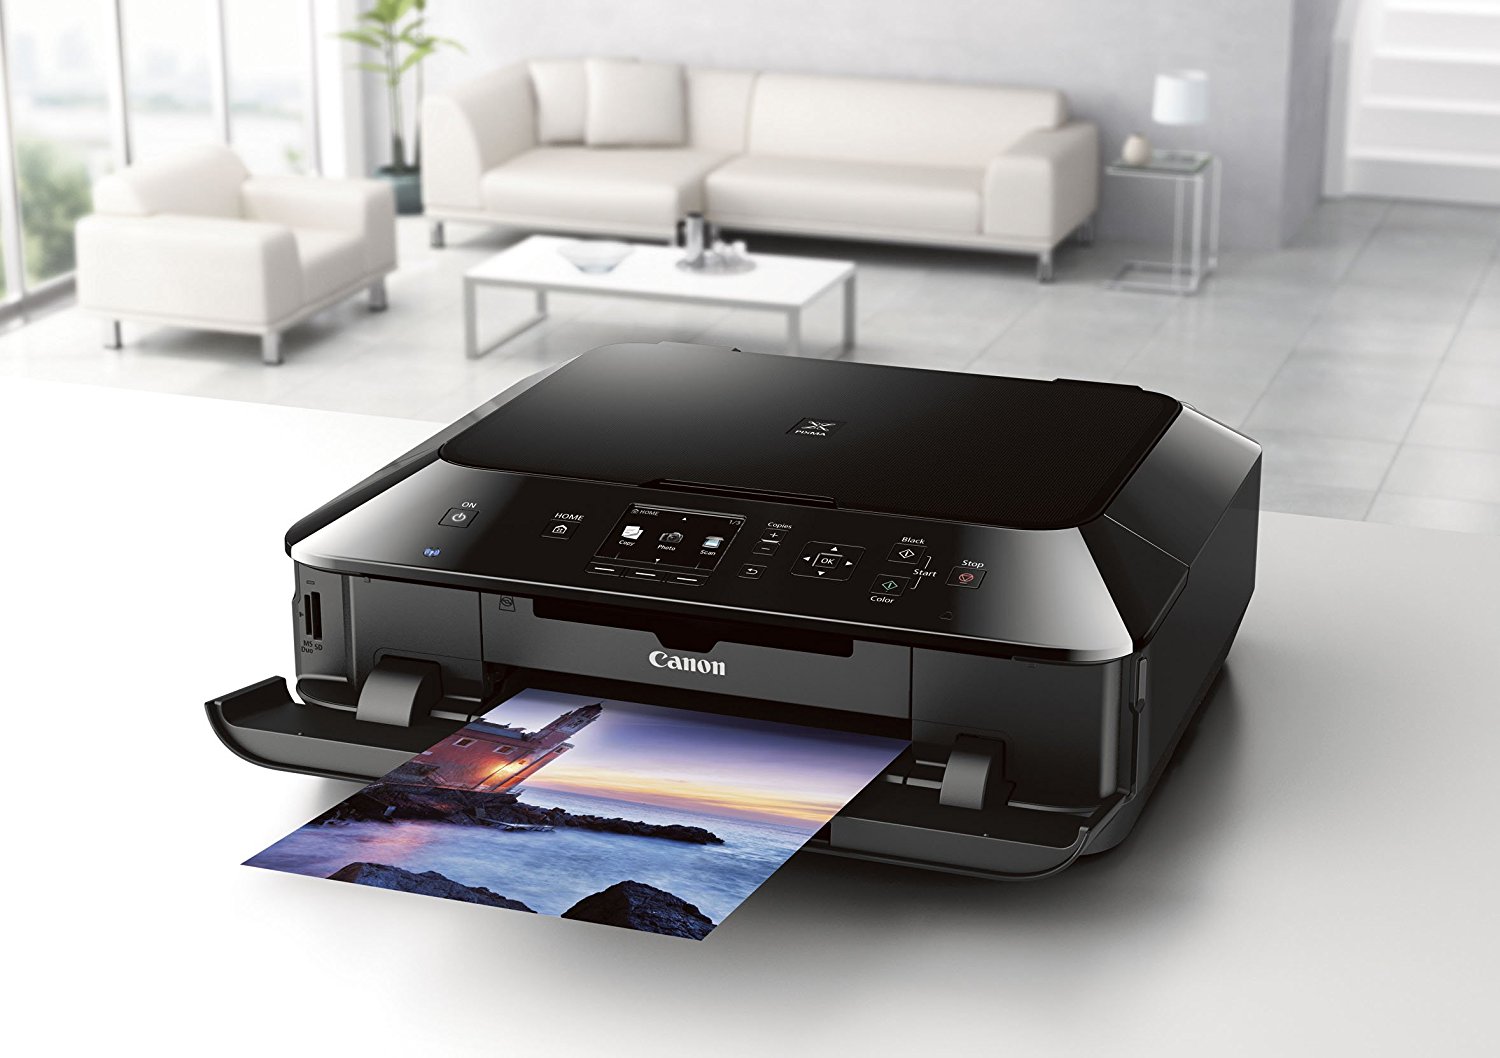 Canon Pixma Mg5420 Wireless Color Photo Printer Discontinued By Manufacturer N3 Free Image 3497